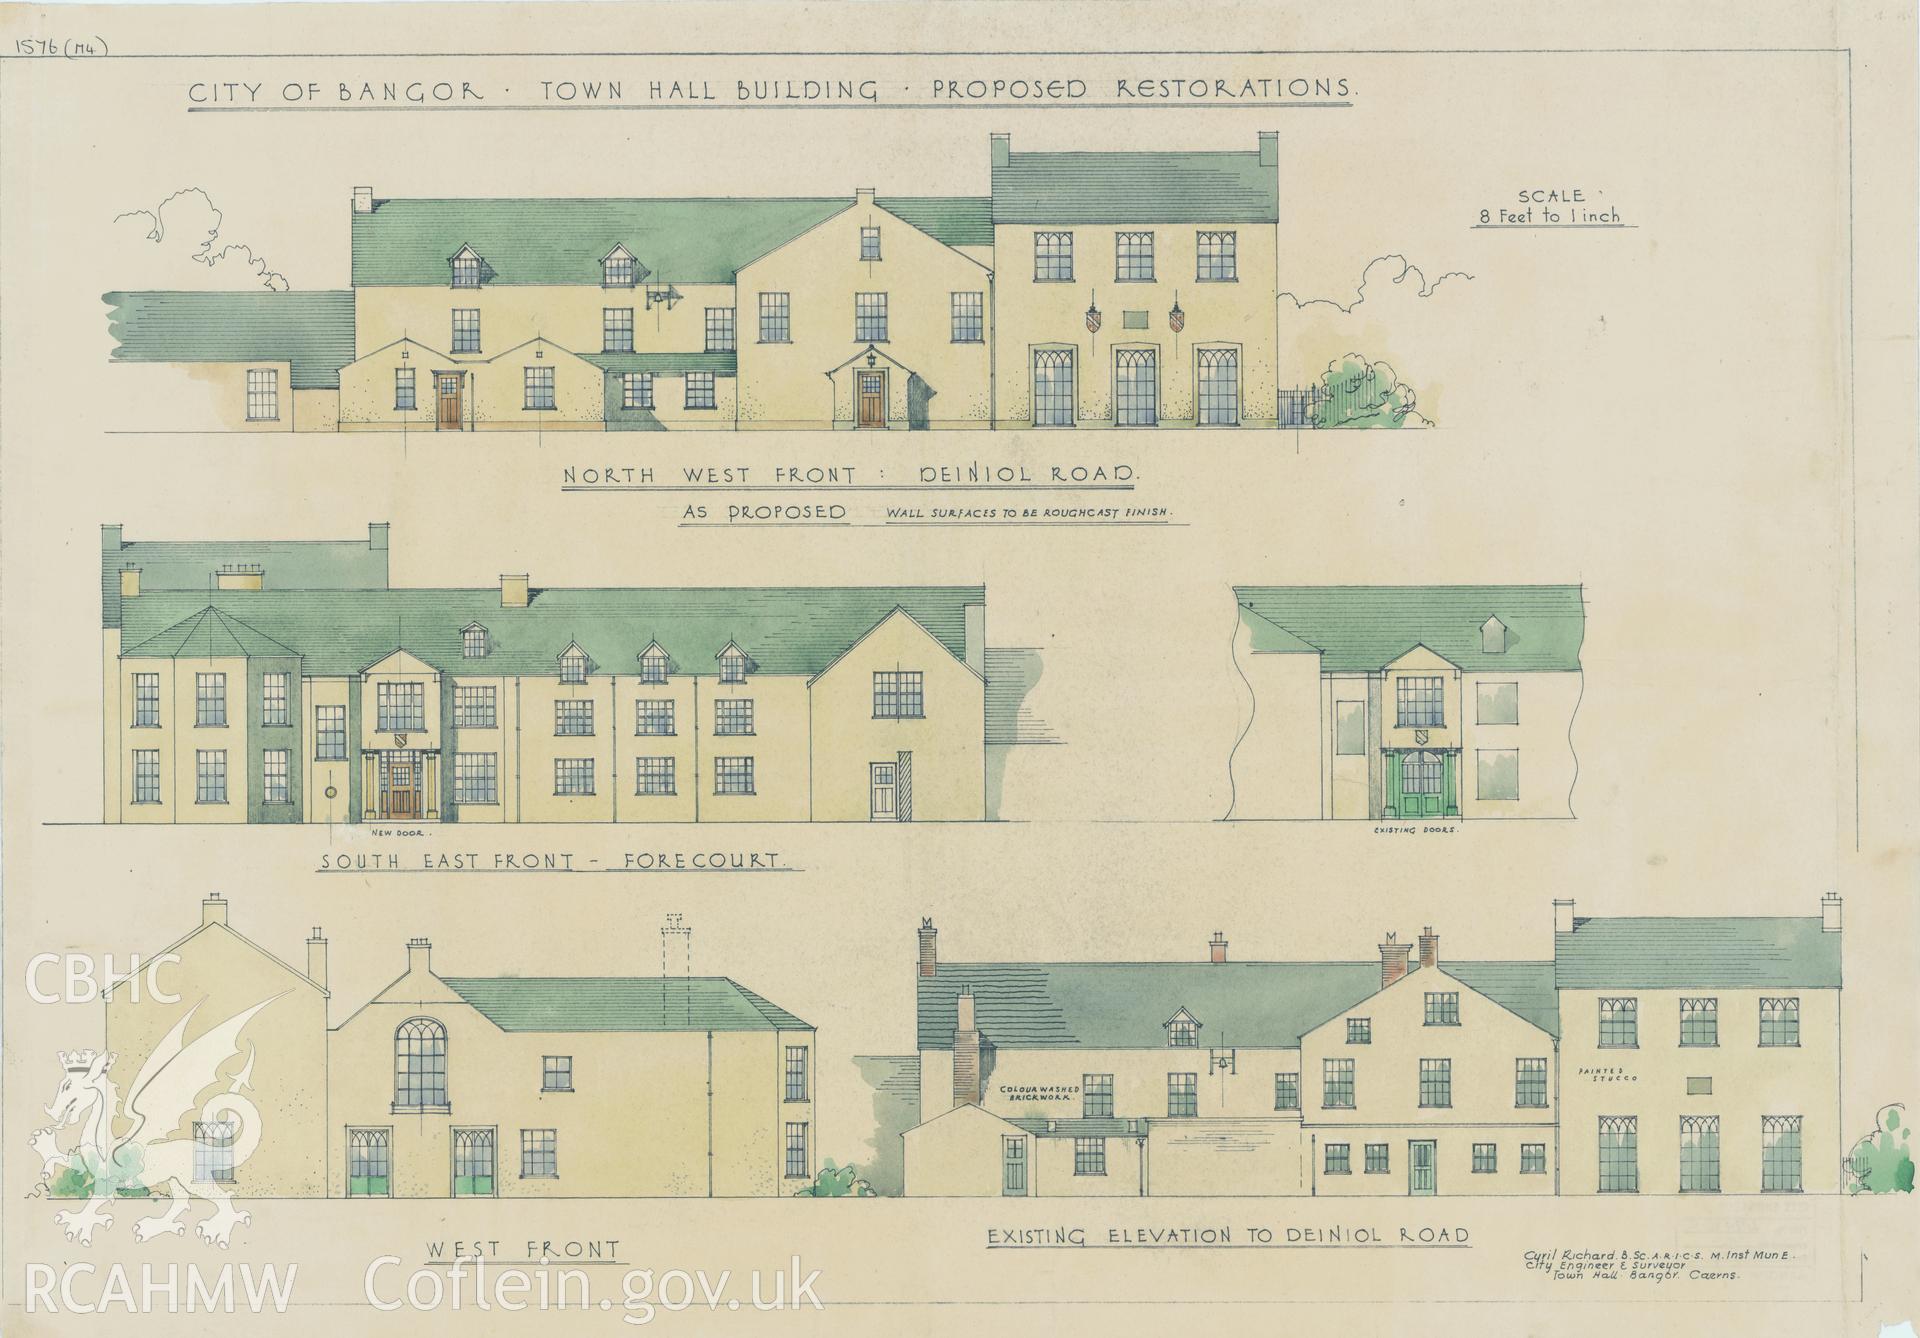 Copy of a non RCAHMW drawing by C. Richards showing elevation of Bishops Palace, Bangor.